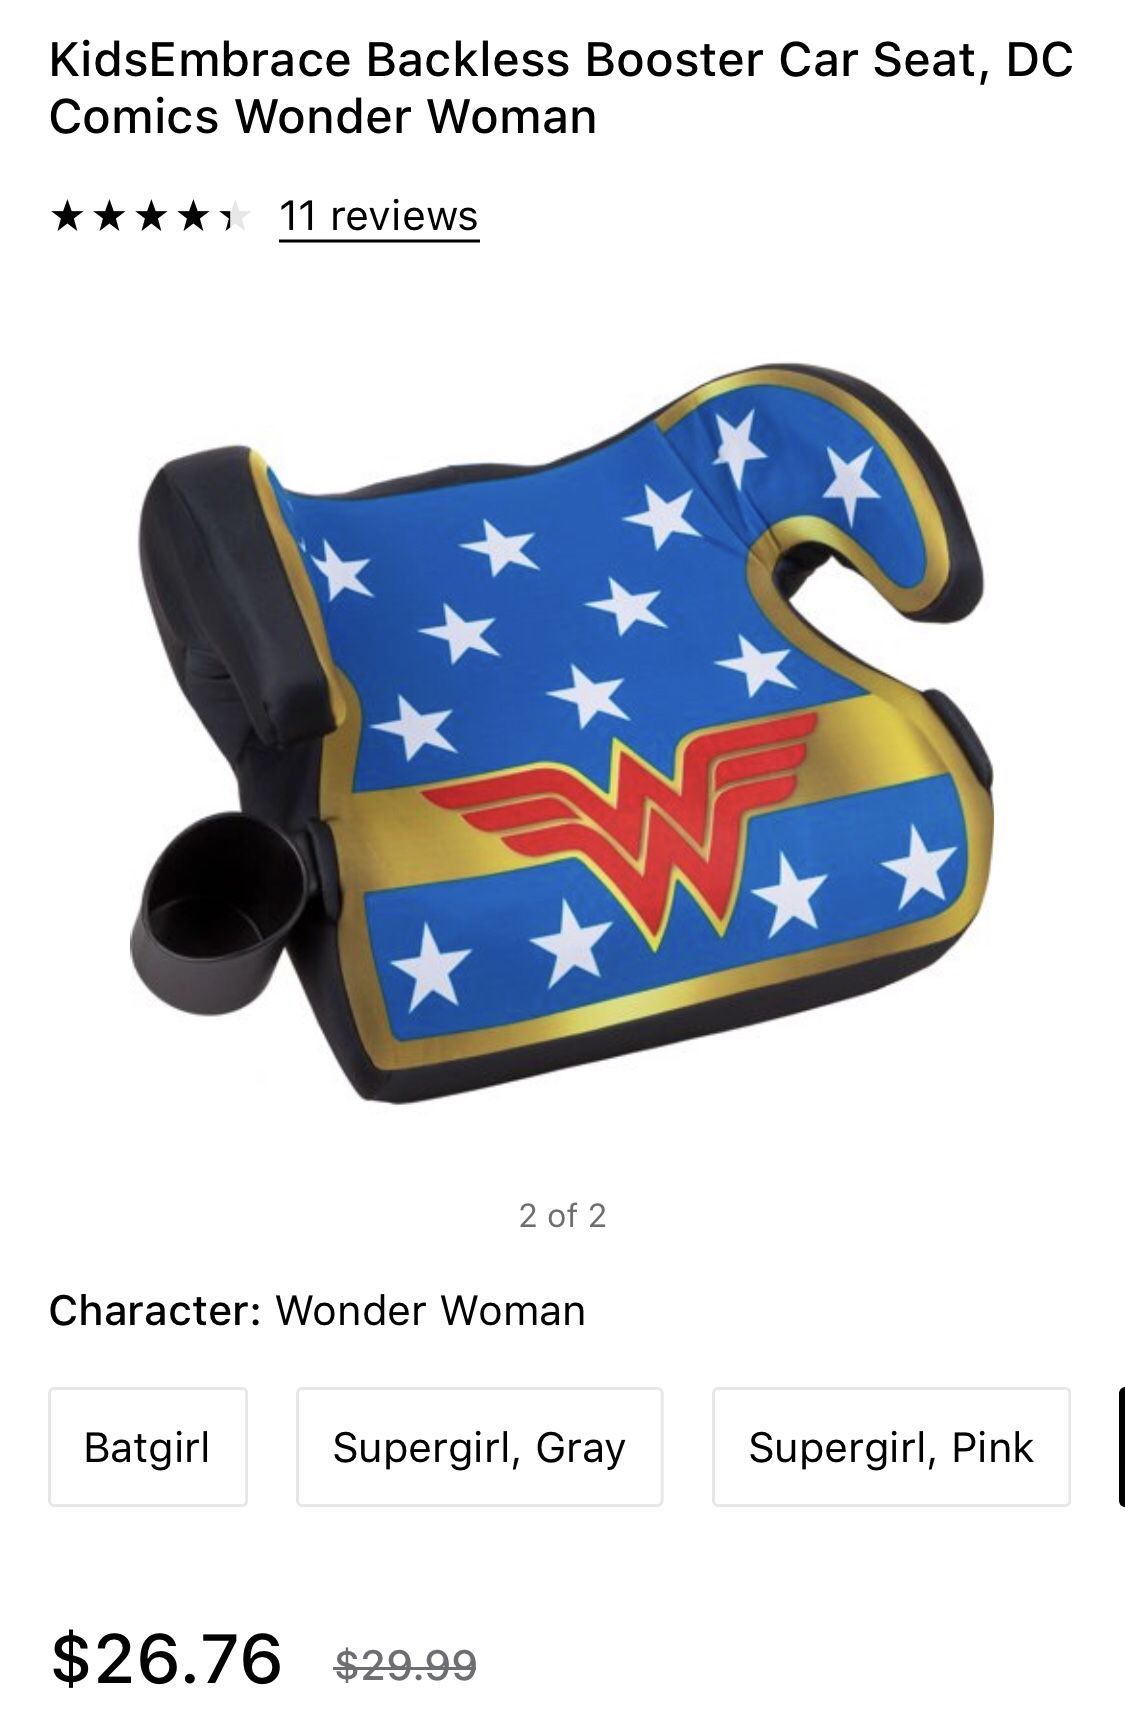 New, in box. Wonder Woman booster seat.